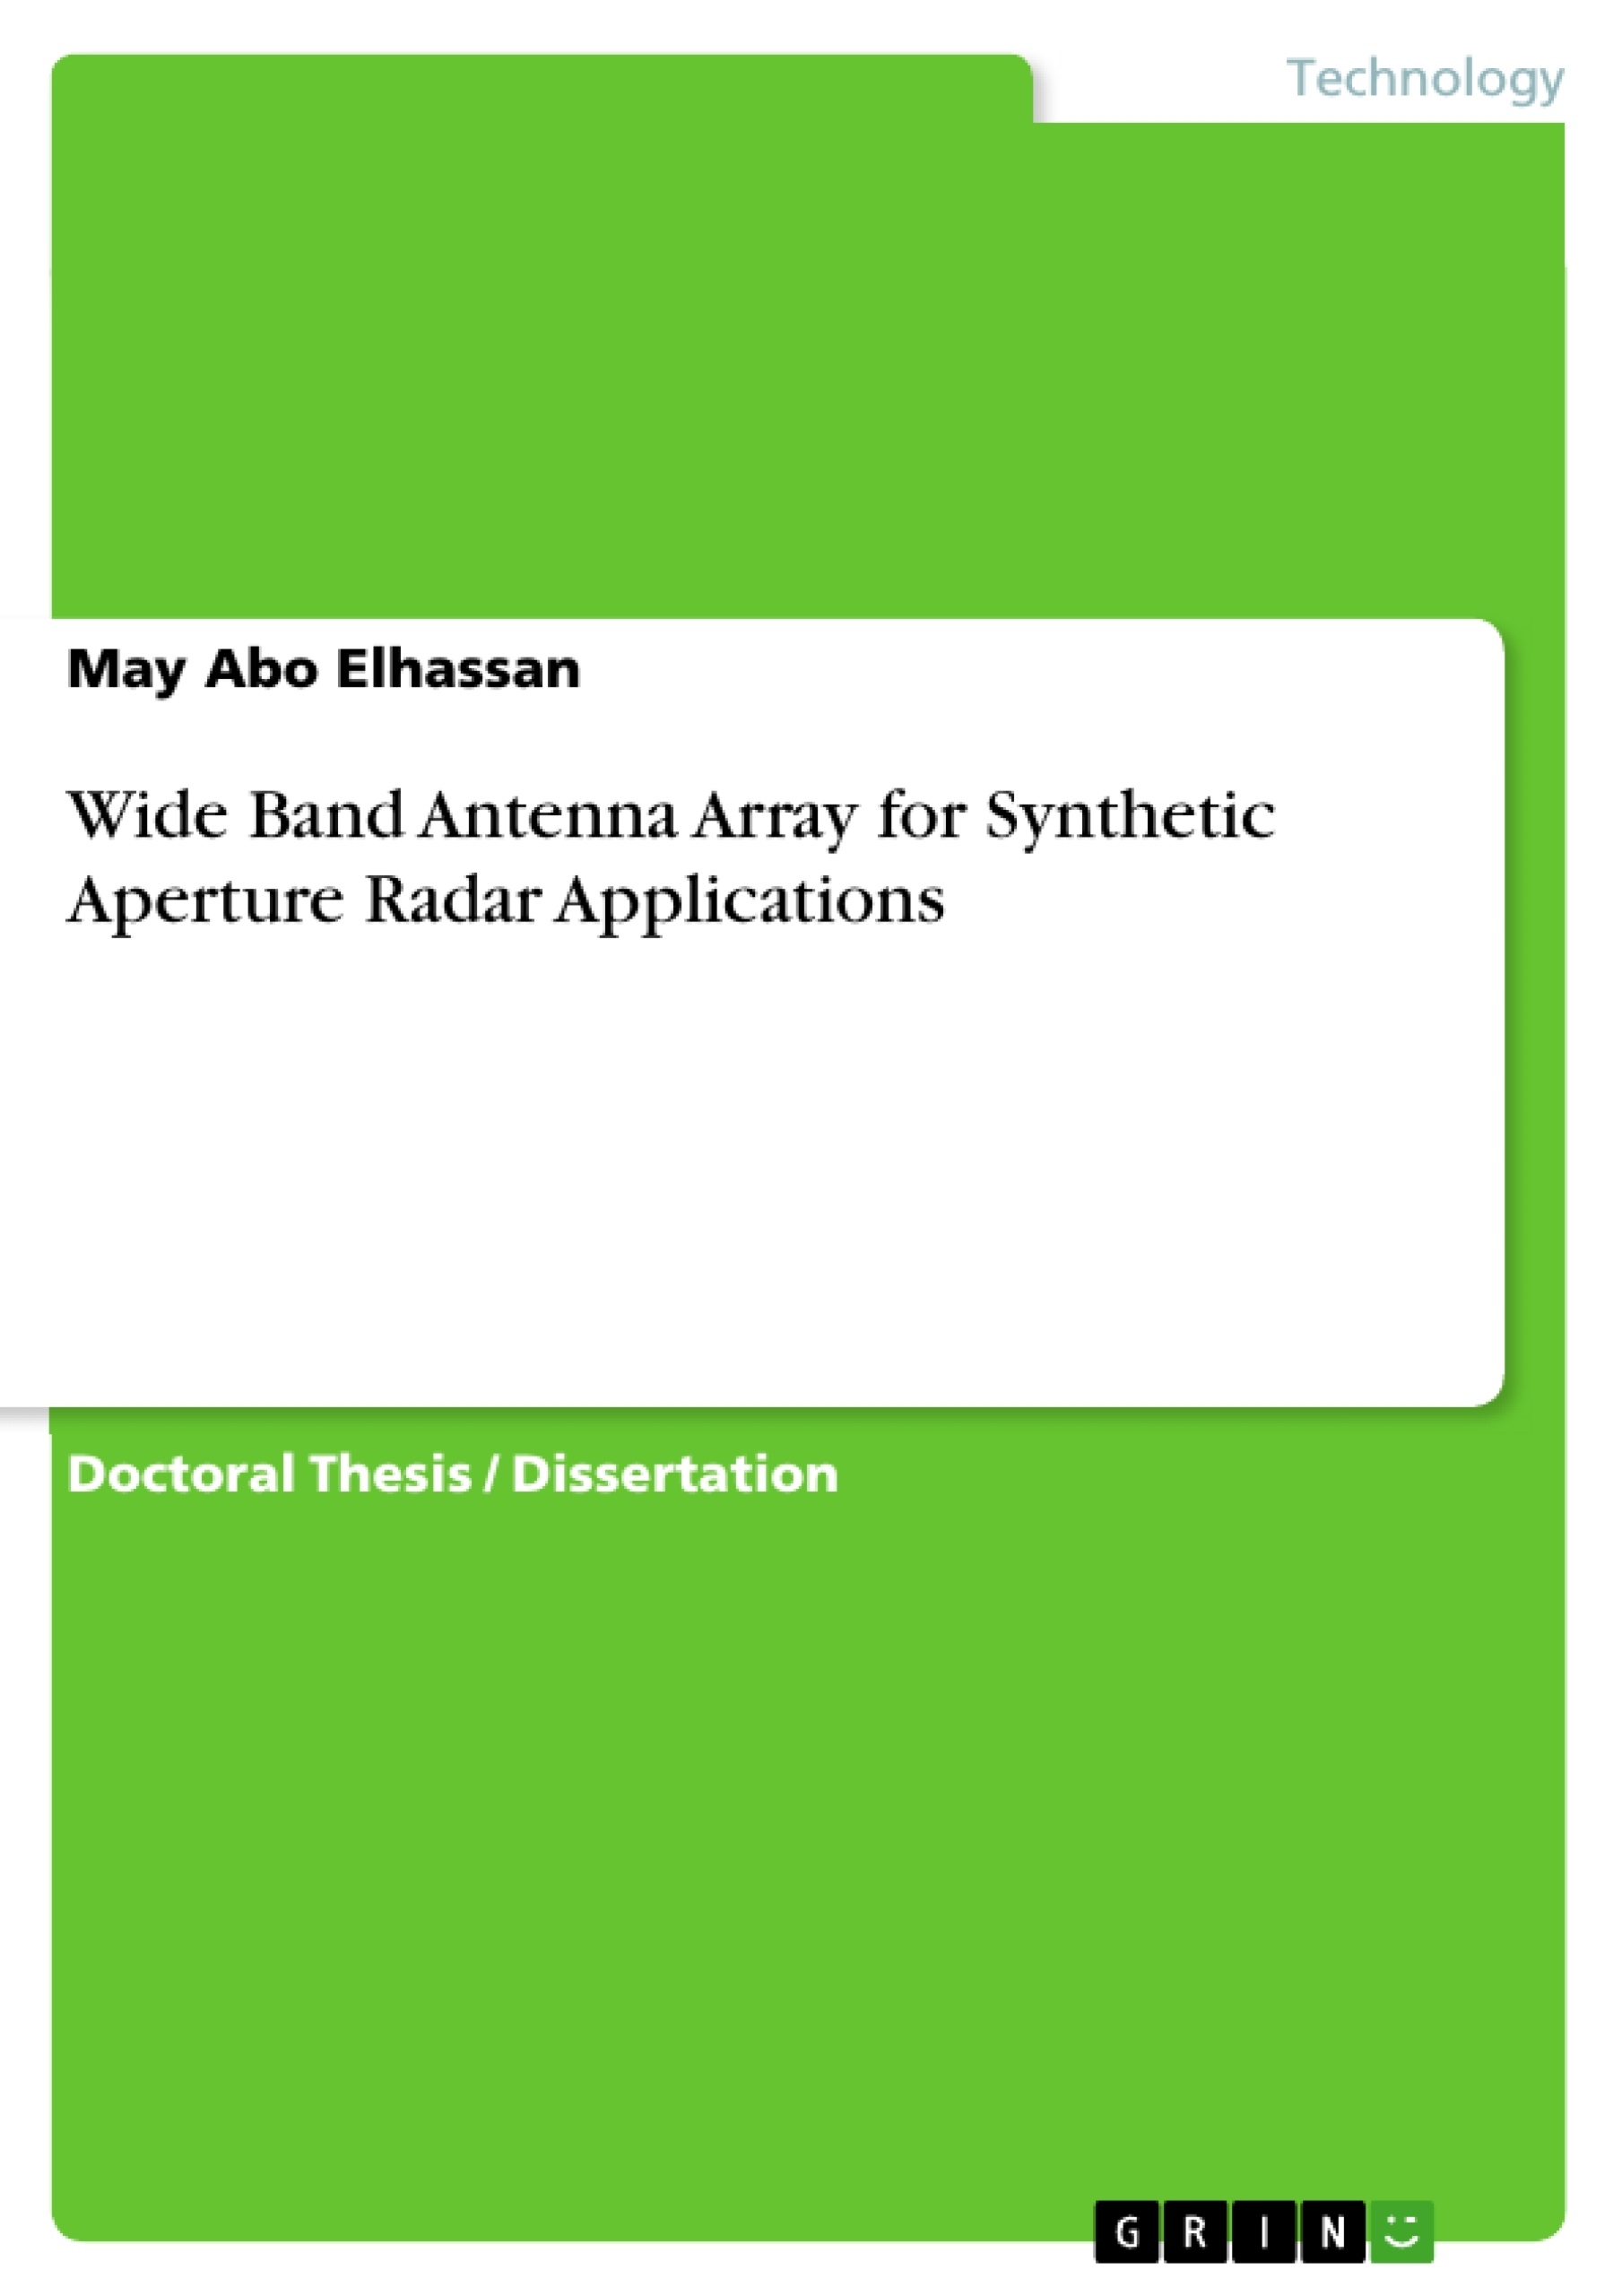 Title: Wide Band Antenna Array for Synthetic Aperture Radar Applications